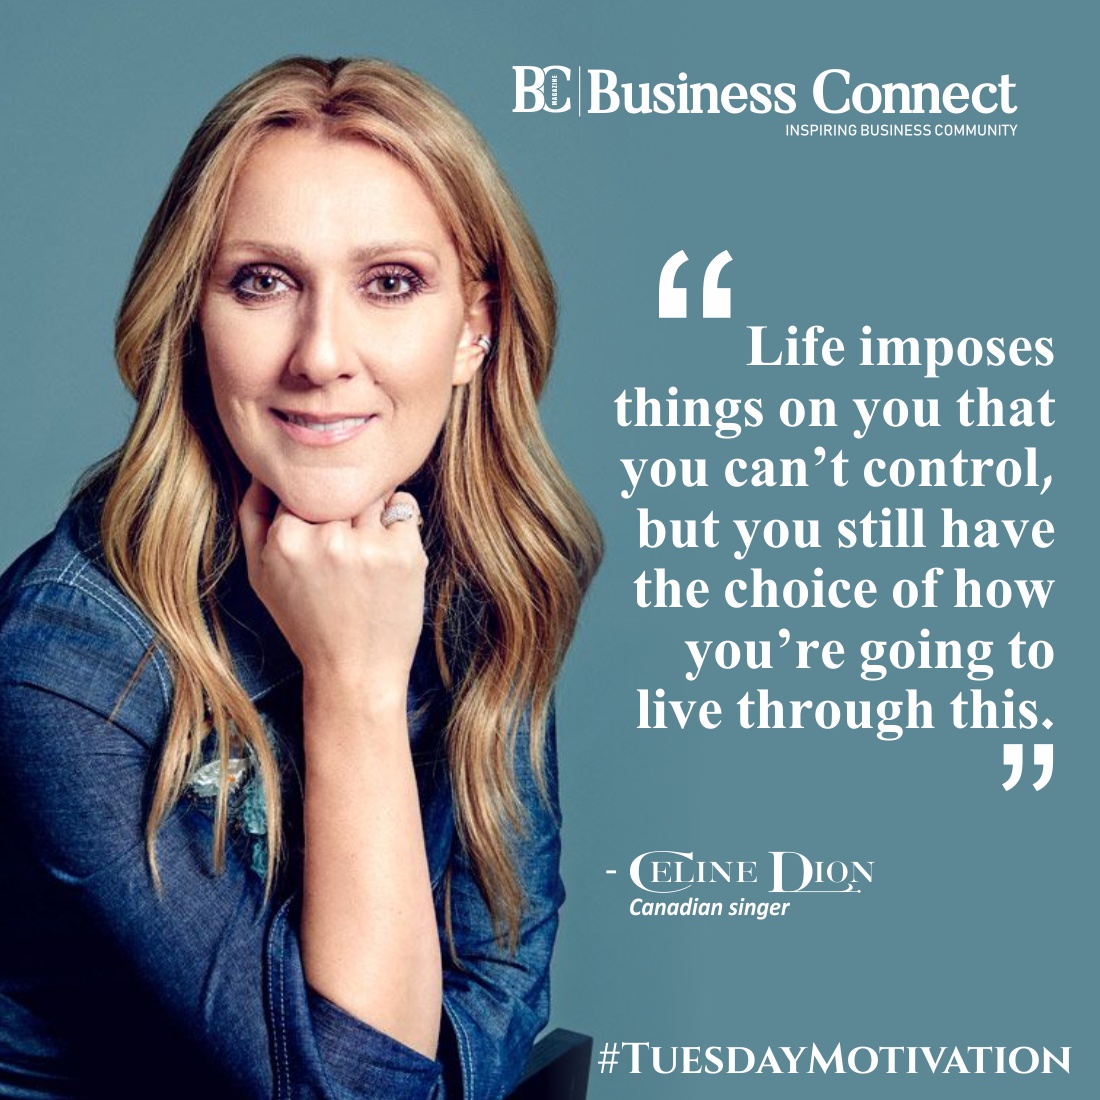 'Life imposes things on you that you can’t control, but you still have the choice of how you’re going to live through this.' — Celine Dion

#quote #quotes #quotesoftheday #quotesdaily #motivationquote #todayquote #motivationdaily #motivatonvibes #quotesaboutlife #motivationquote